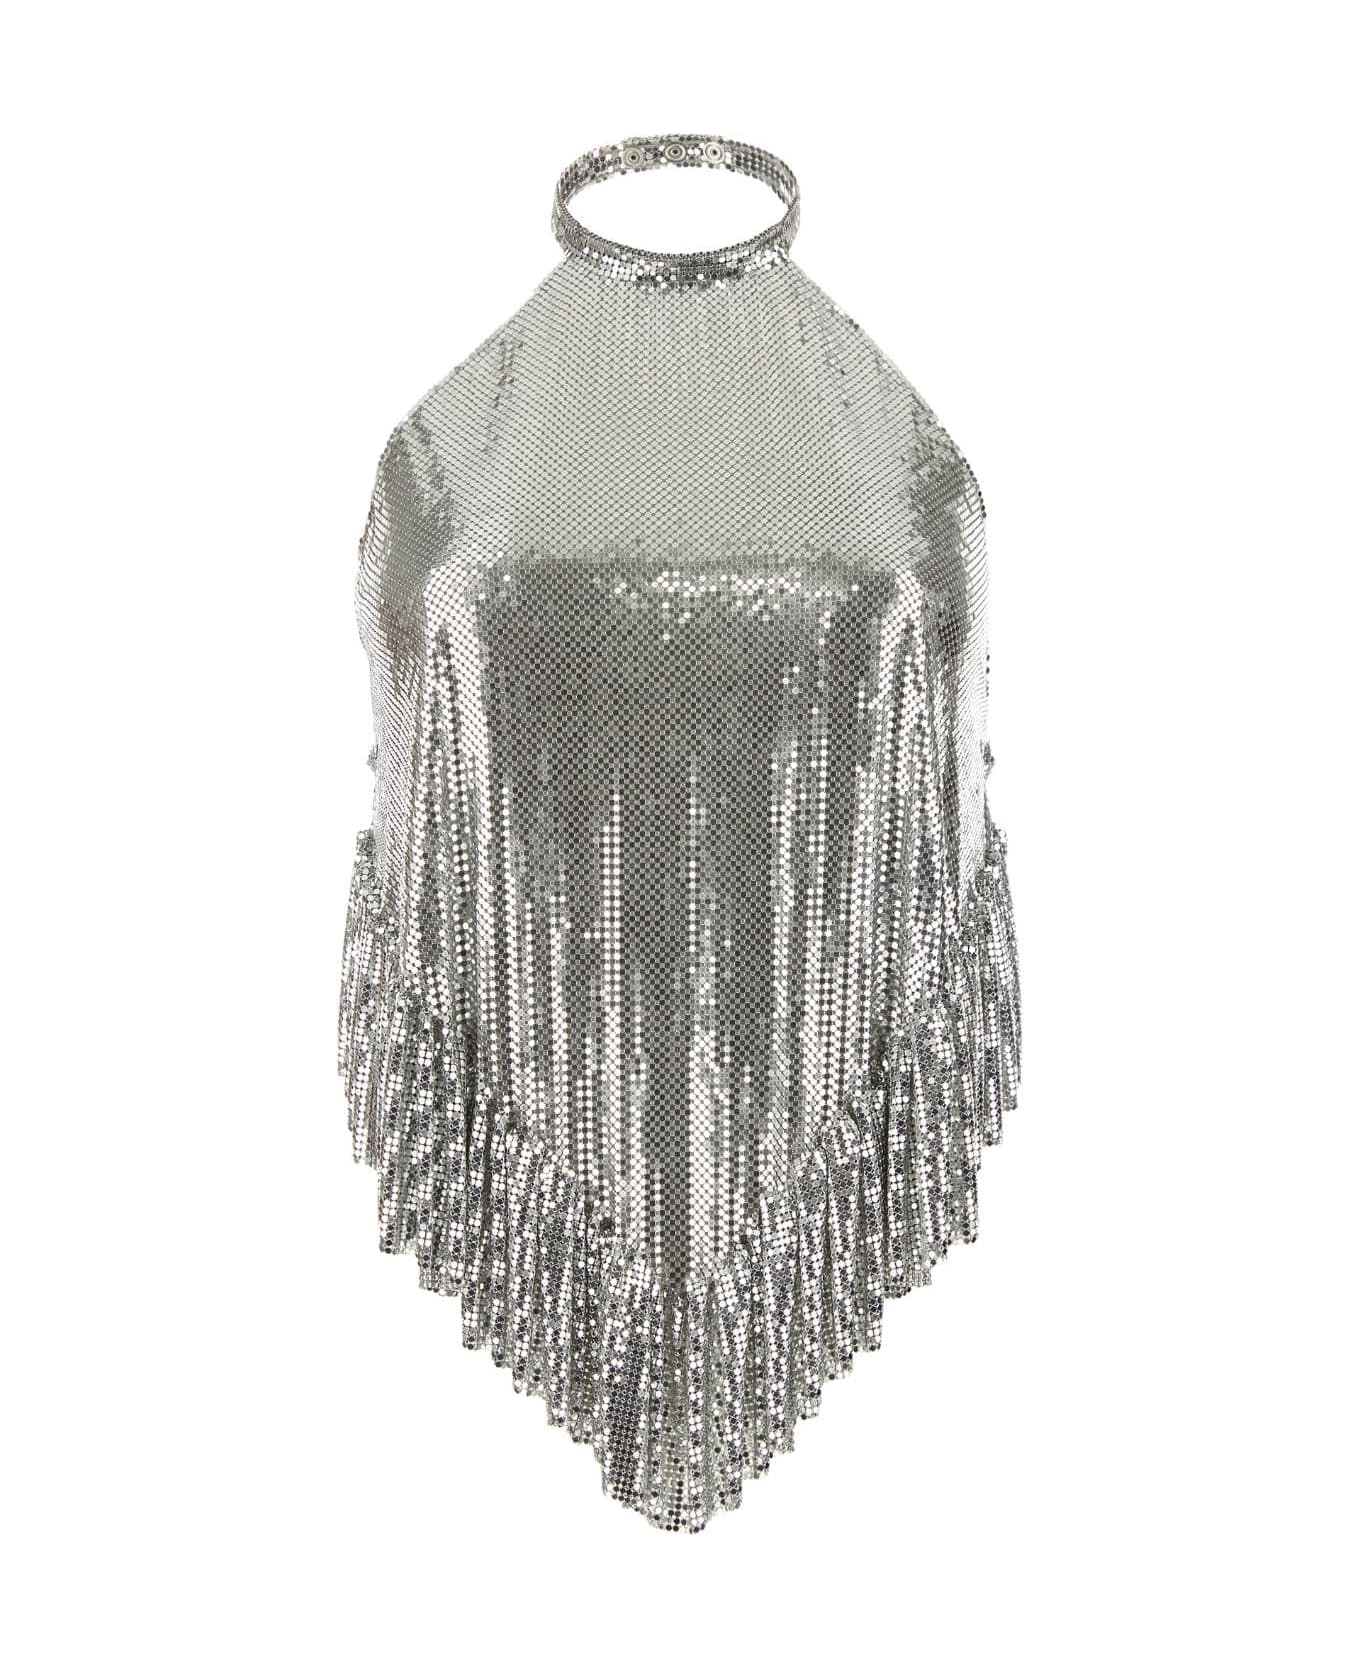 Paco Rabanne Silver Chain Mail Top - SILVER